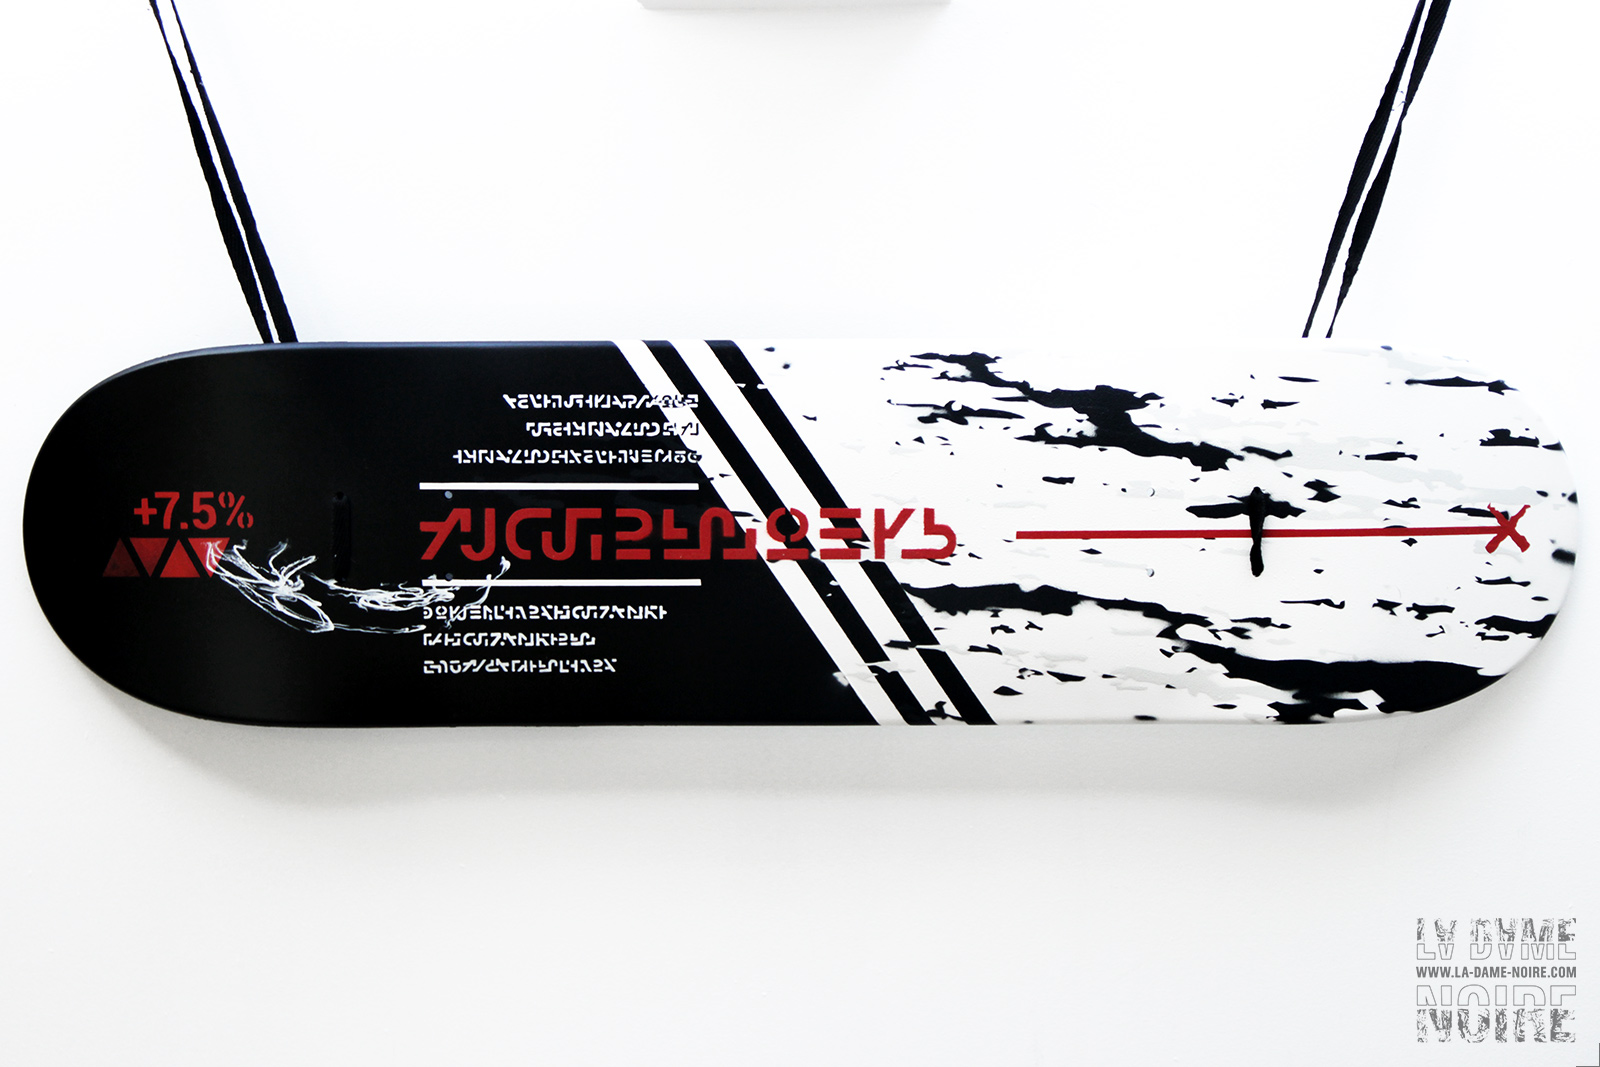 Skateboard customized with spray can in black and white with red stripes